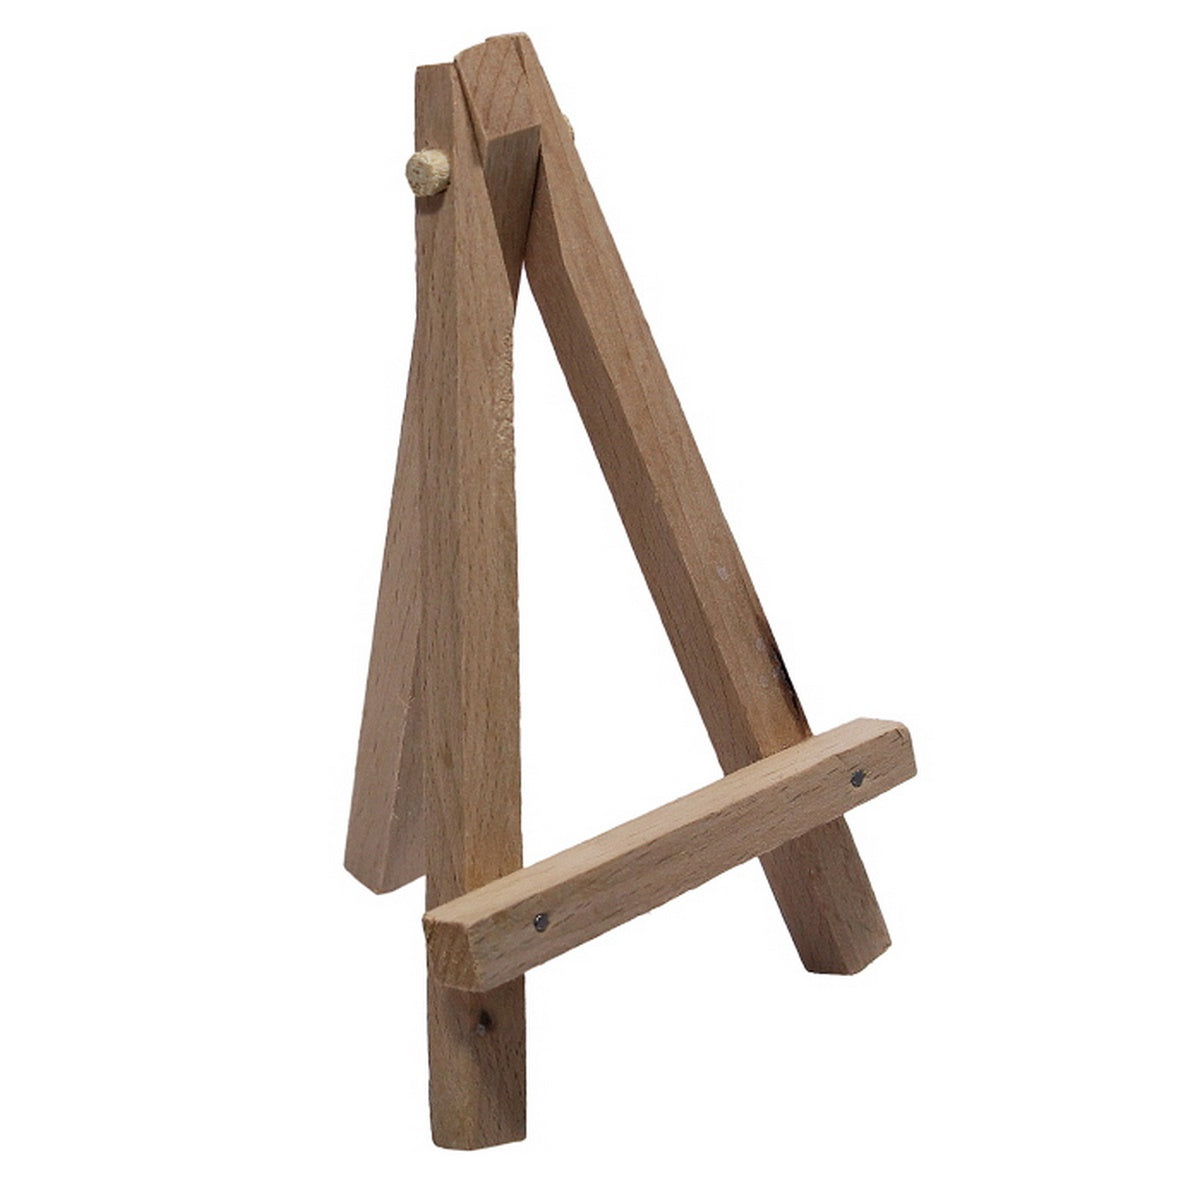 WOODEN EASEL SMALL 5'' WECT00 (JG)